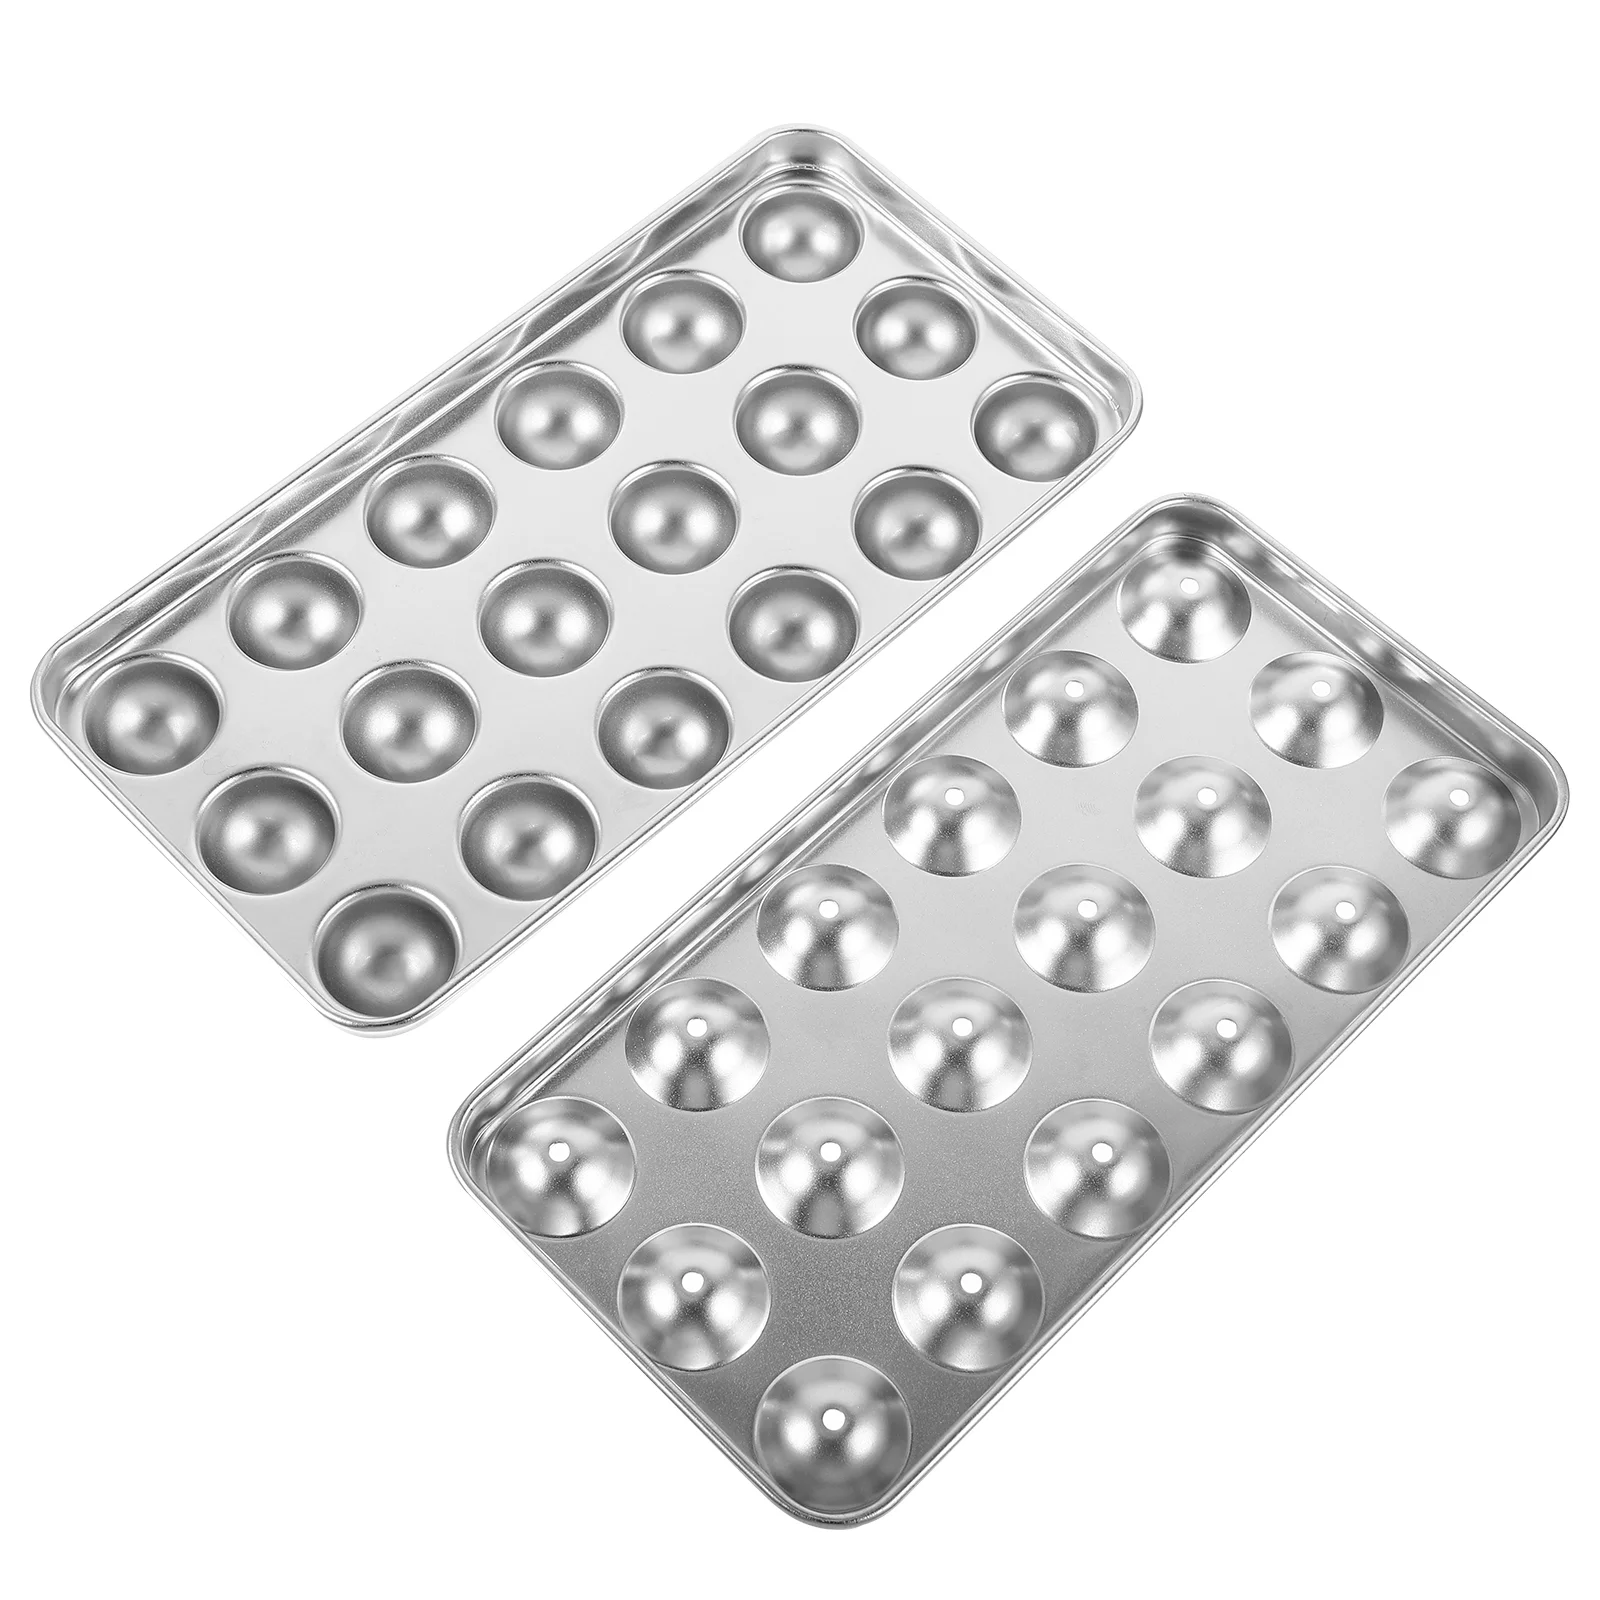 

Cube Tray Stainless Steel Making Mold With Lids Round Resuable Tray Cube Mold Maker Free for Drinks Cocktails